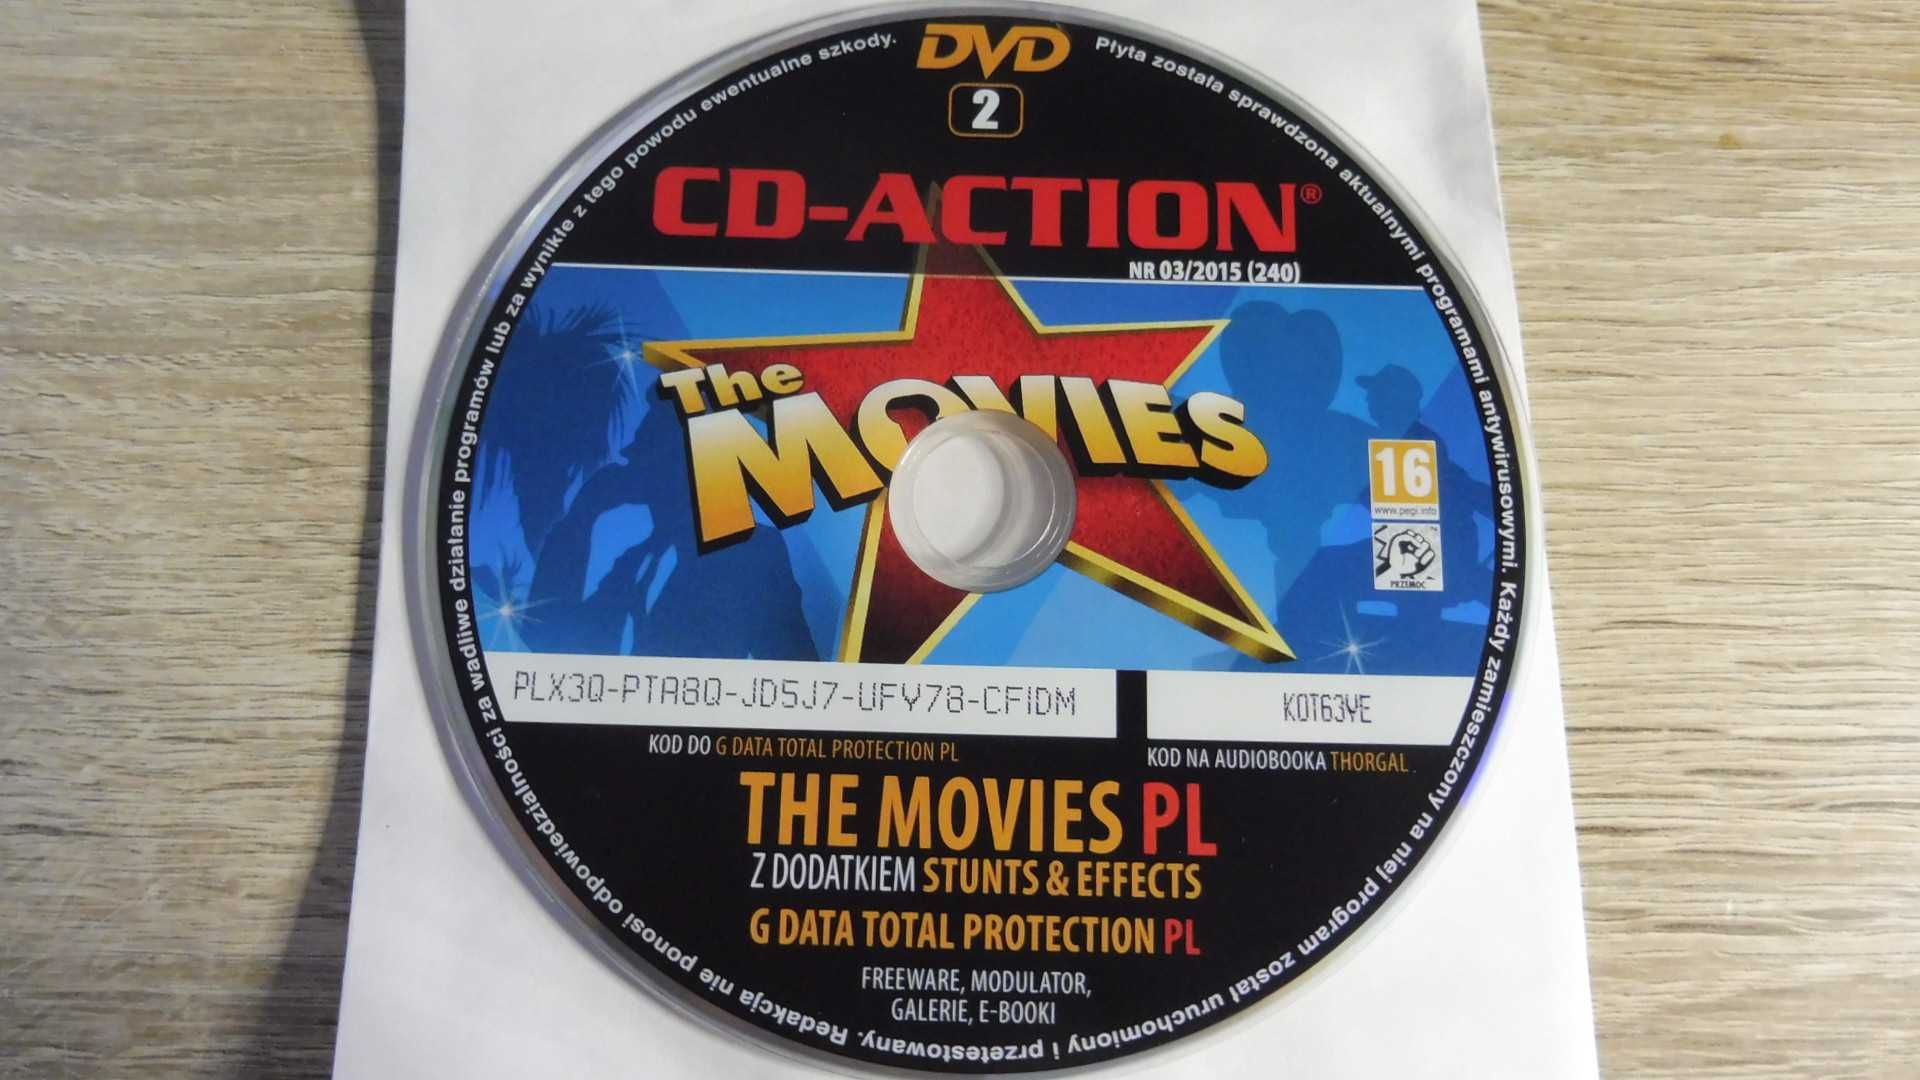 CD Action 03/2015 (240) - DVD 2 - The Movies PL